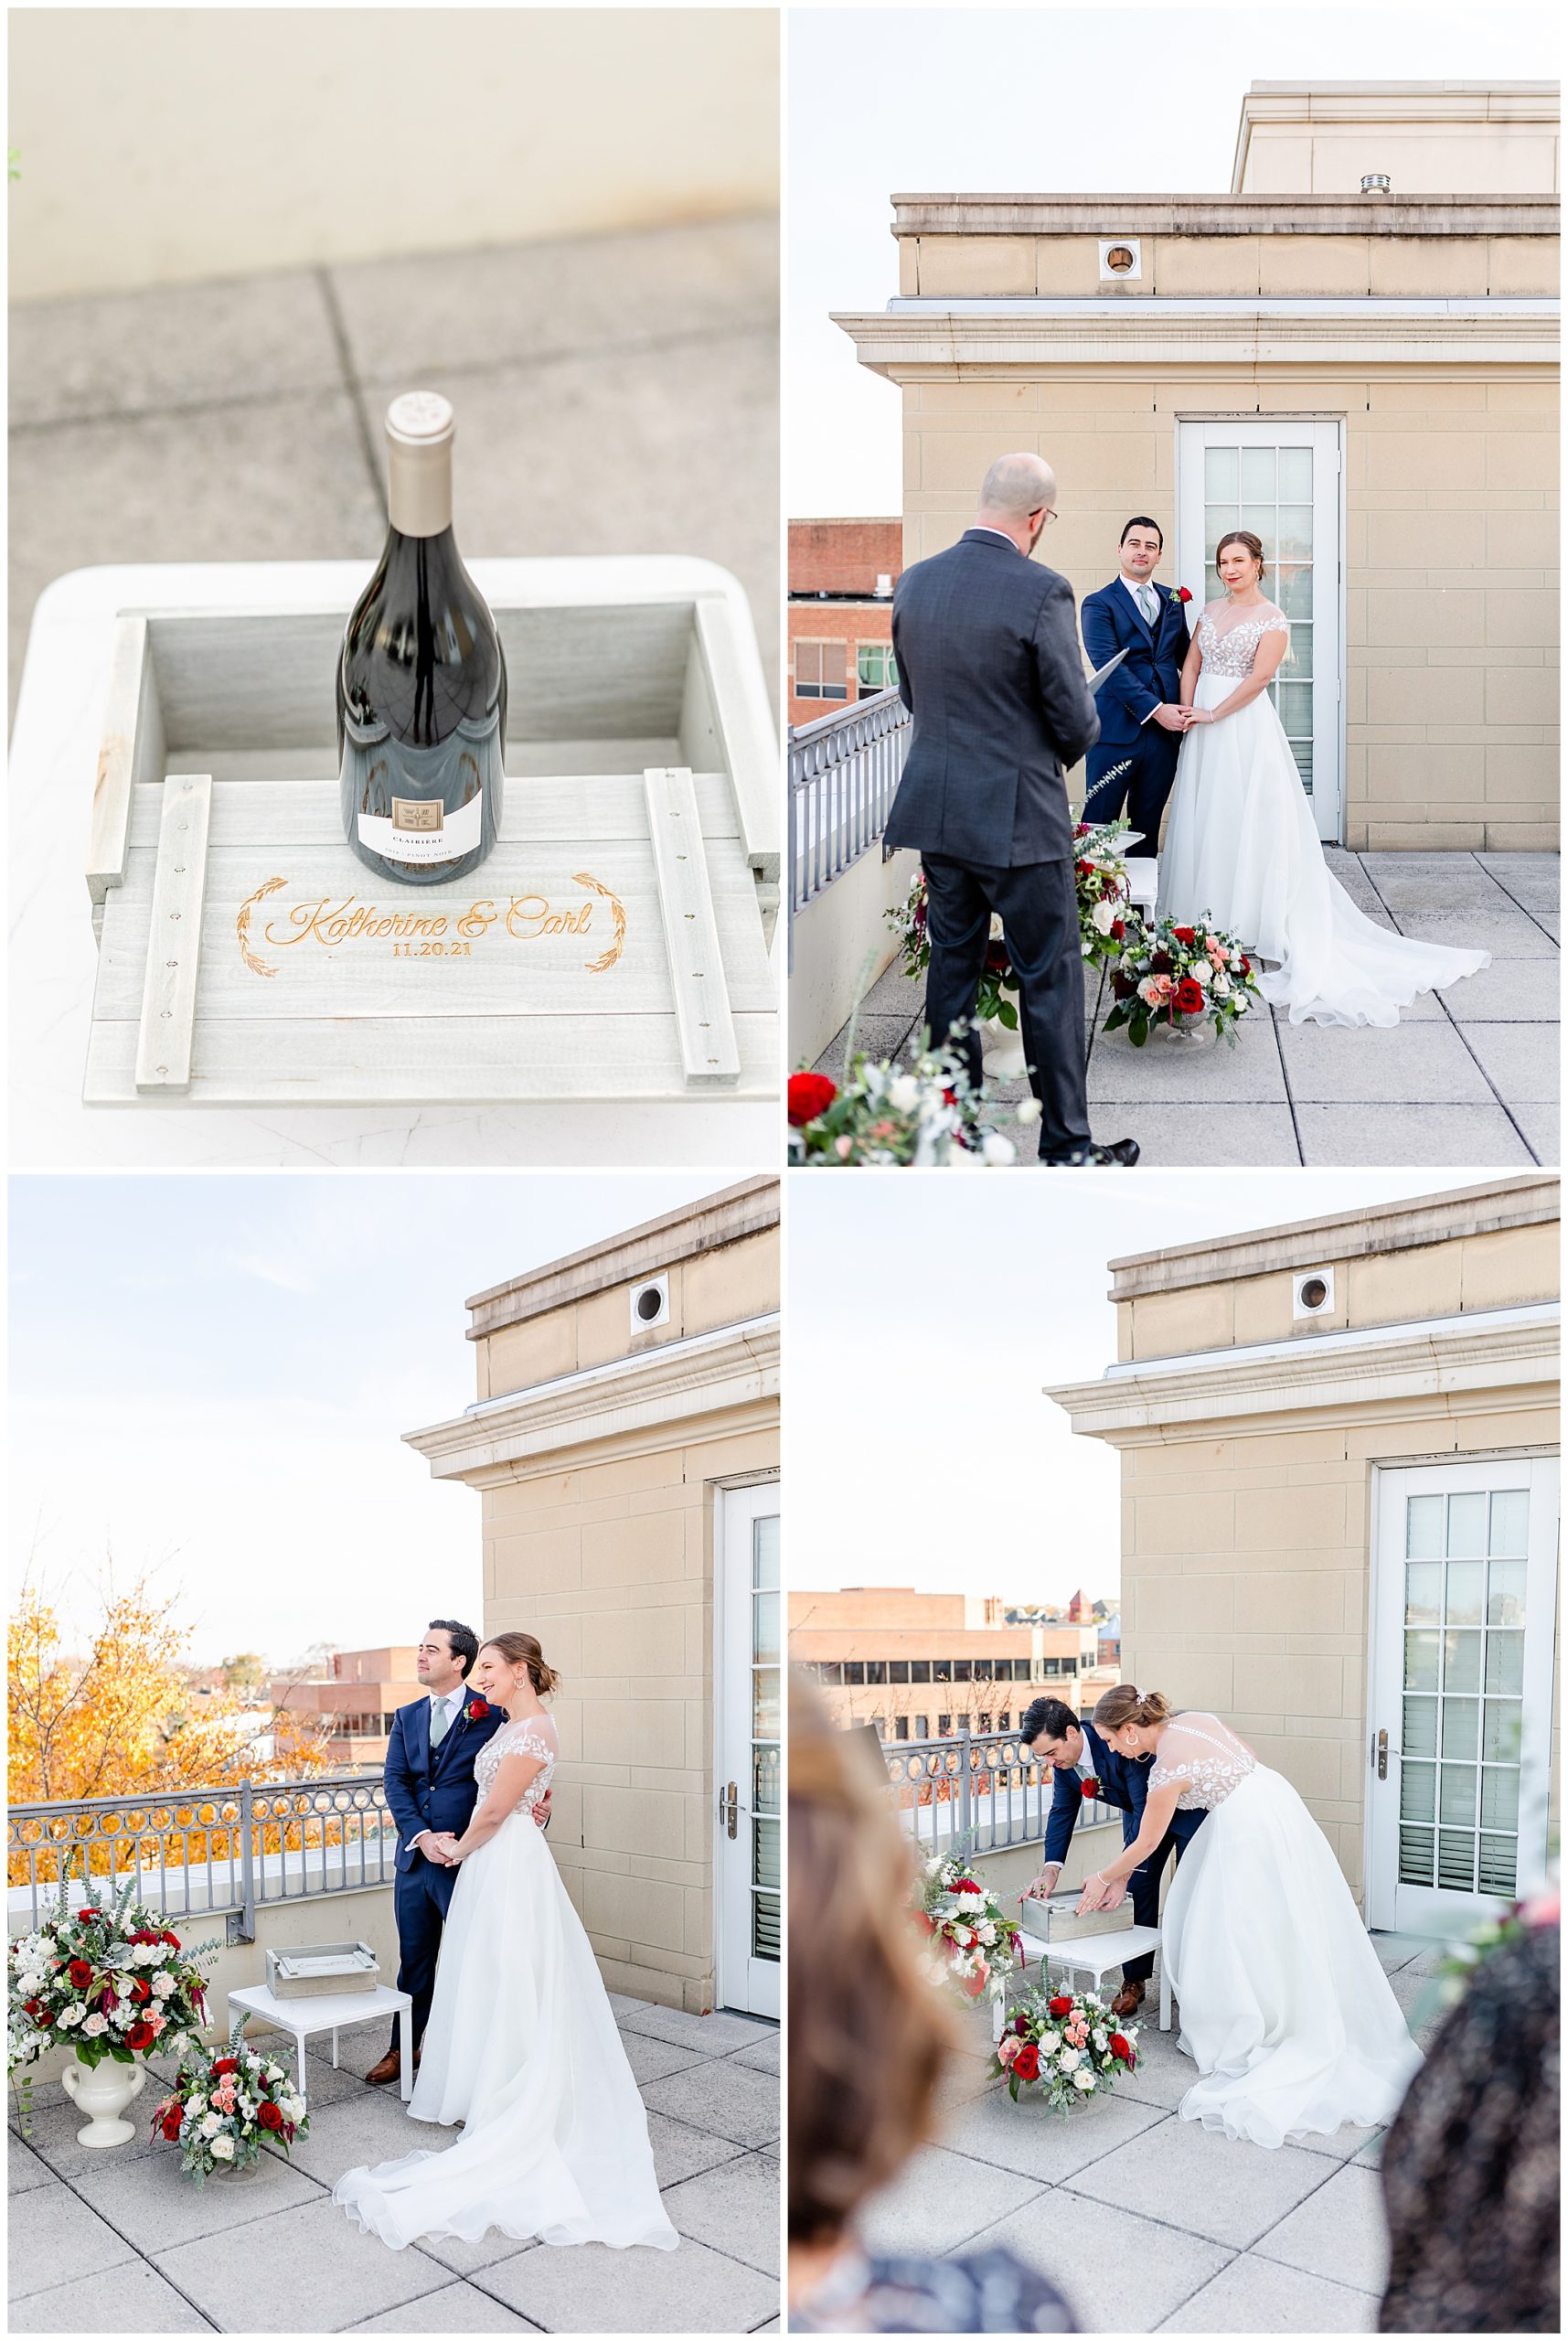 Lorien Alexandria winter wedding, Old Town Alexandria wedding, Alexandria Virginia wedding, DC micro wedding, northern Virginia wedding photographer, Alexandria Virginia wedding photographer, DC wedding photographer, winter wedding aesthetic, Rachel E.H. Photography, couple opening box with wine bottle, couple on rooftop